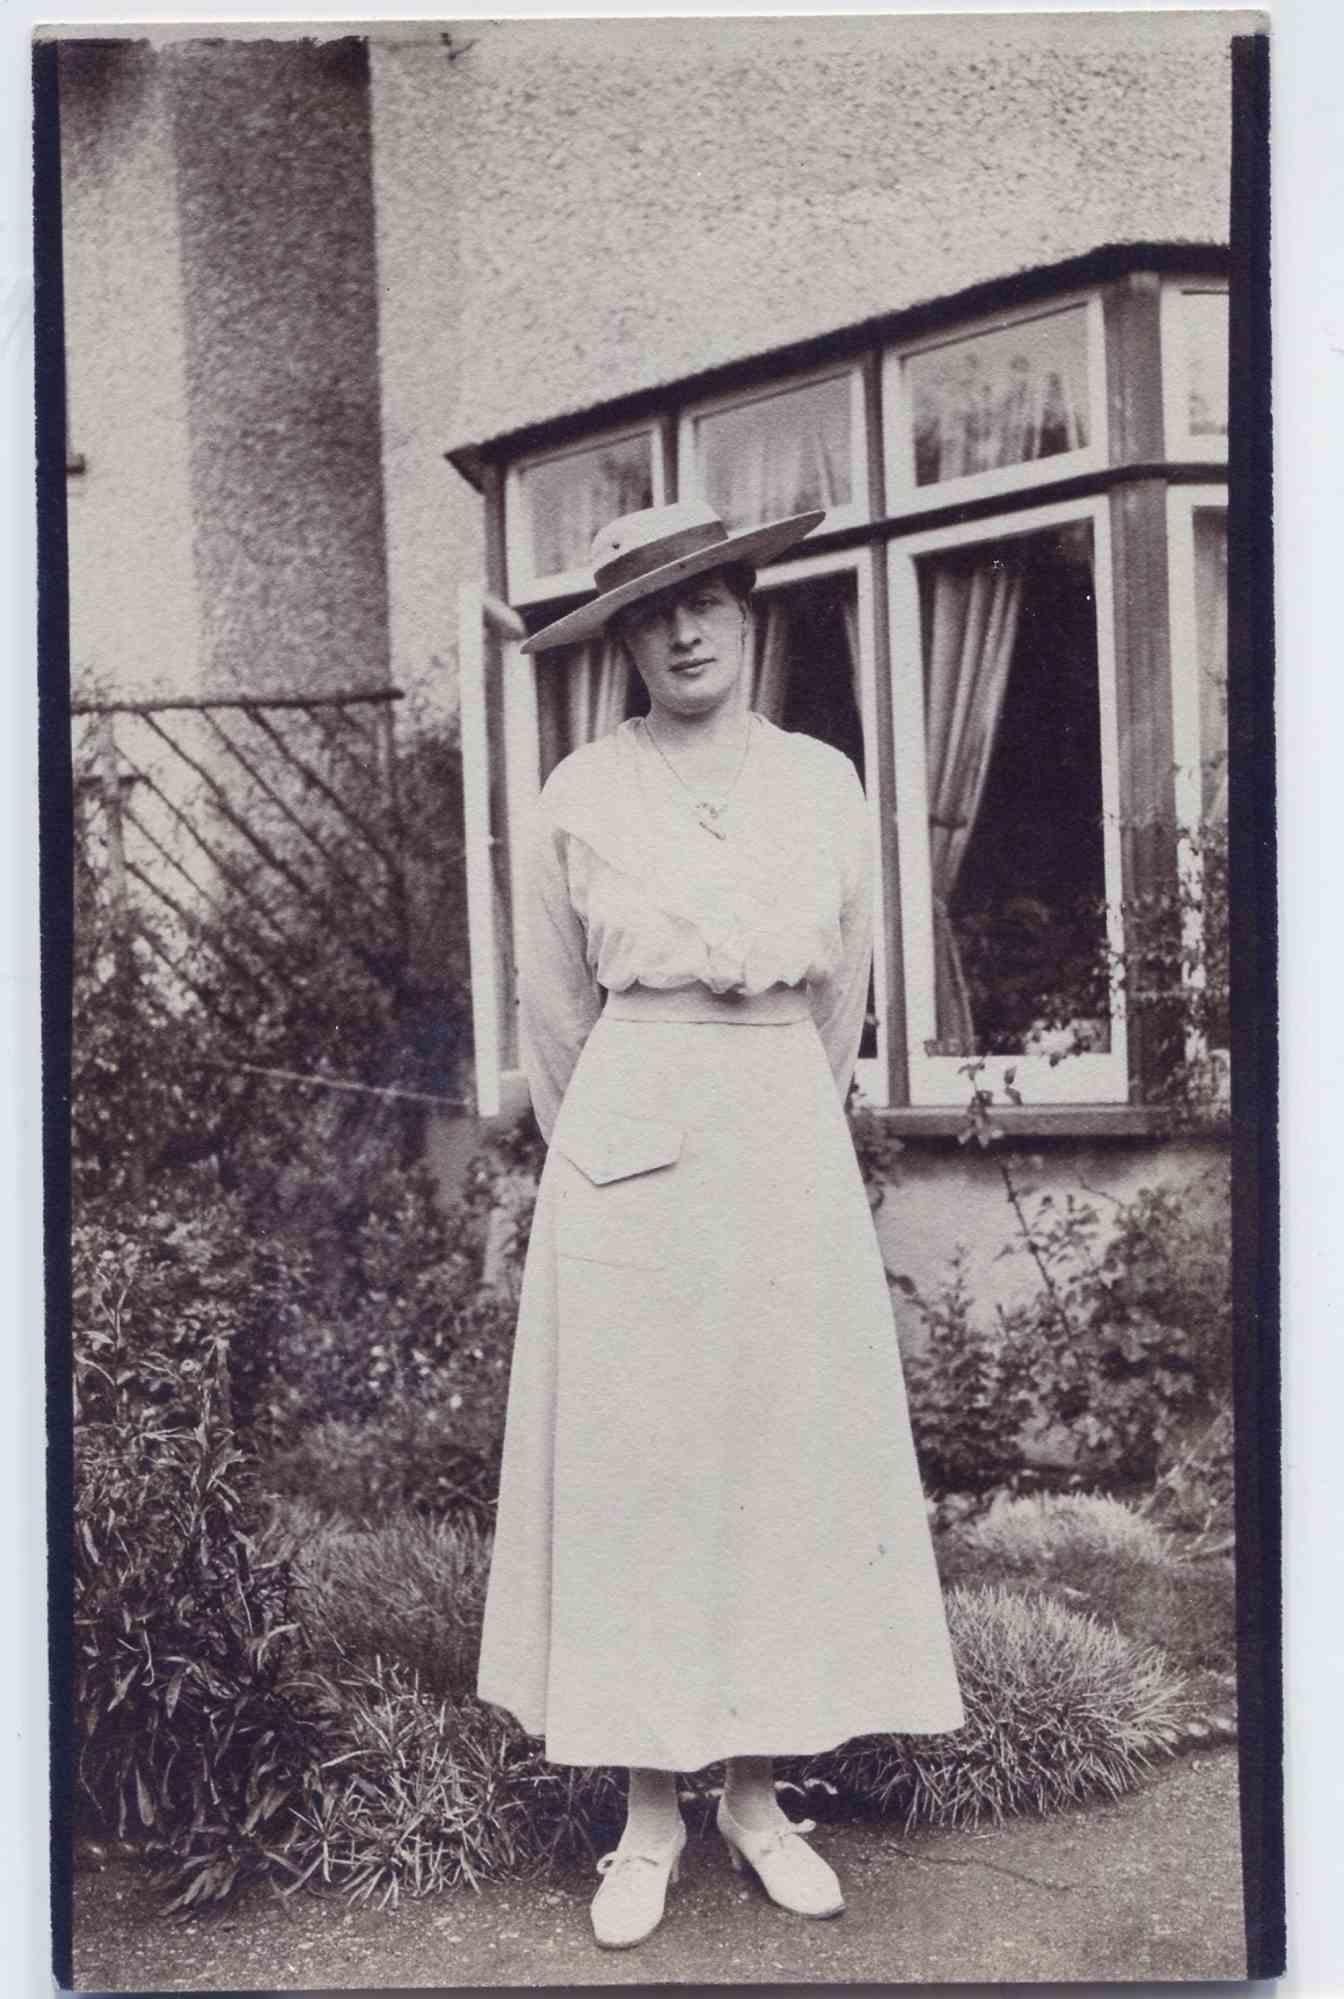 Unknown Landscape Photograph - Old days Photo - Lady in White - Vintage Photo - Mid-20th Century